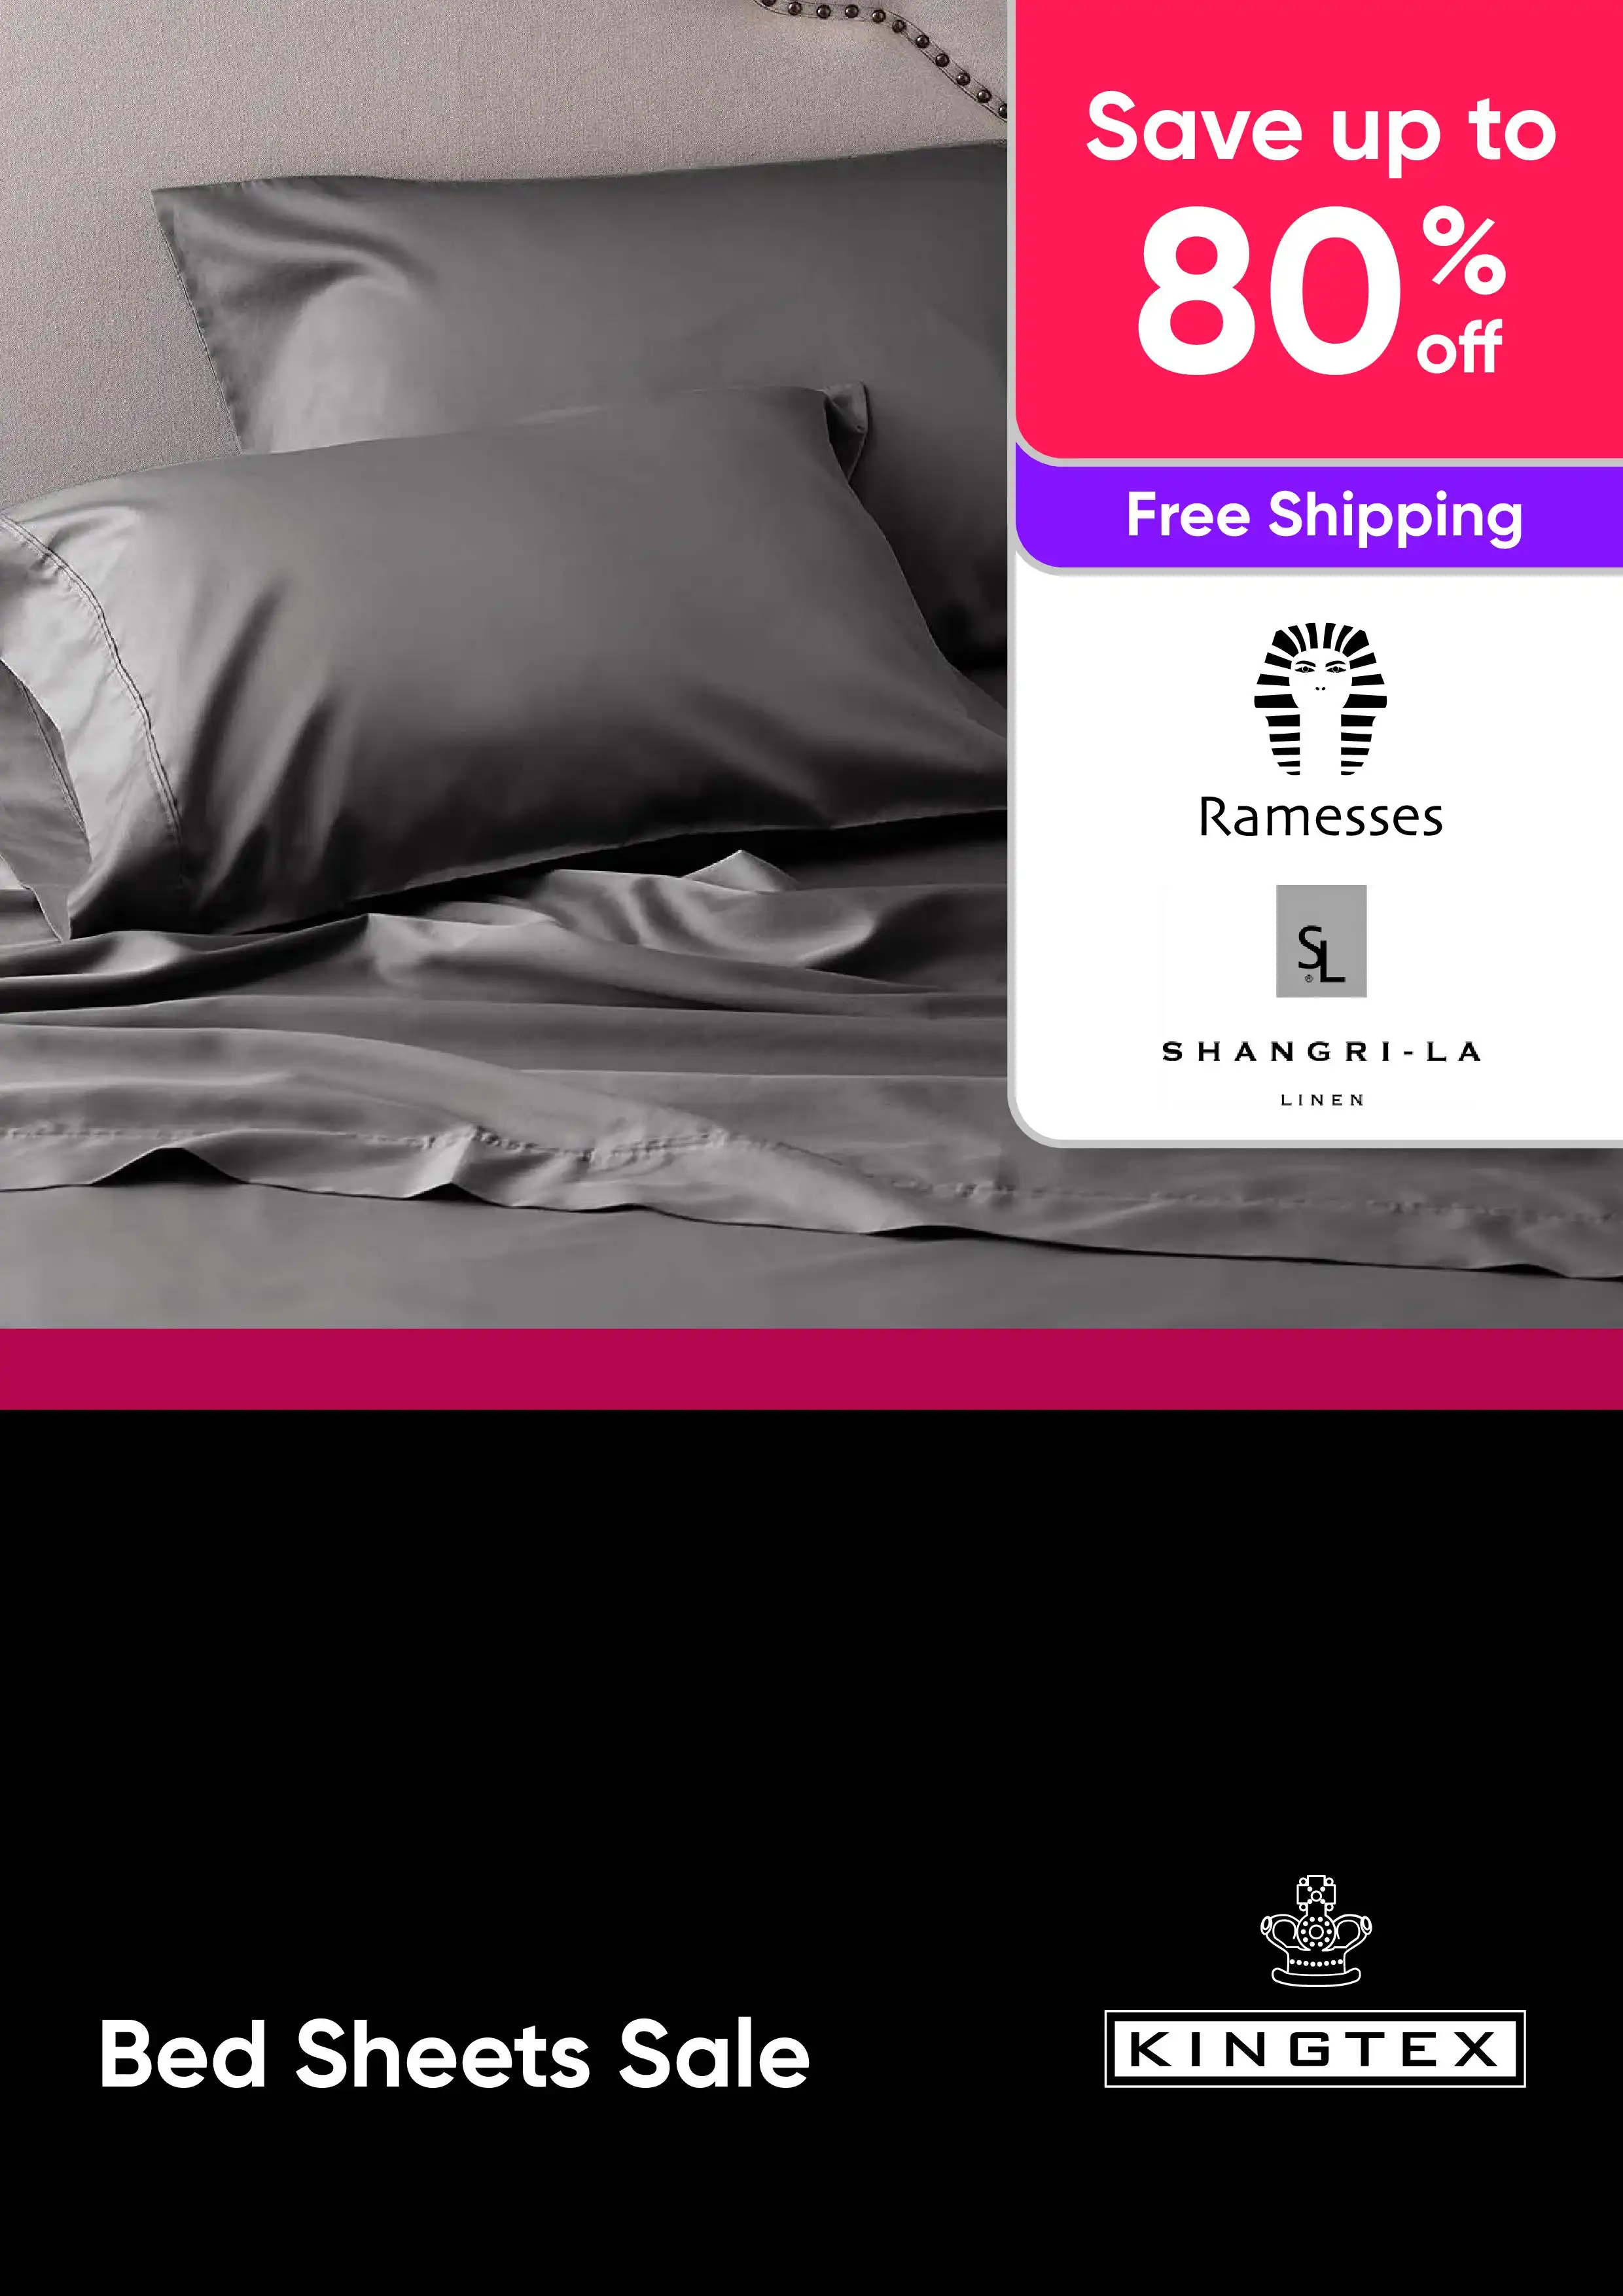 Bed Sheets Sale - Ramesses, Shangir-la - Up to 80% Off